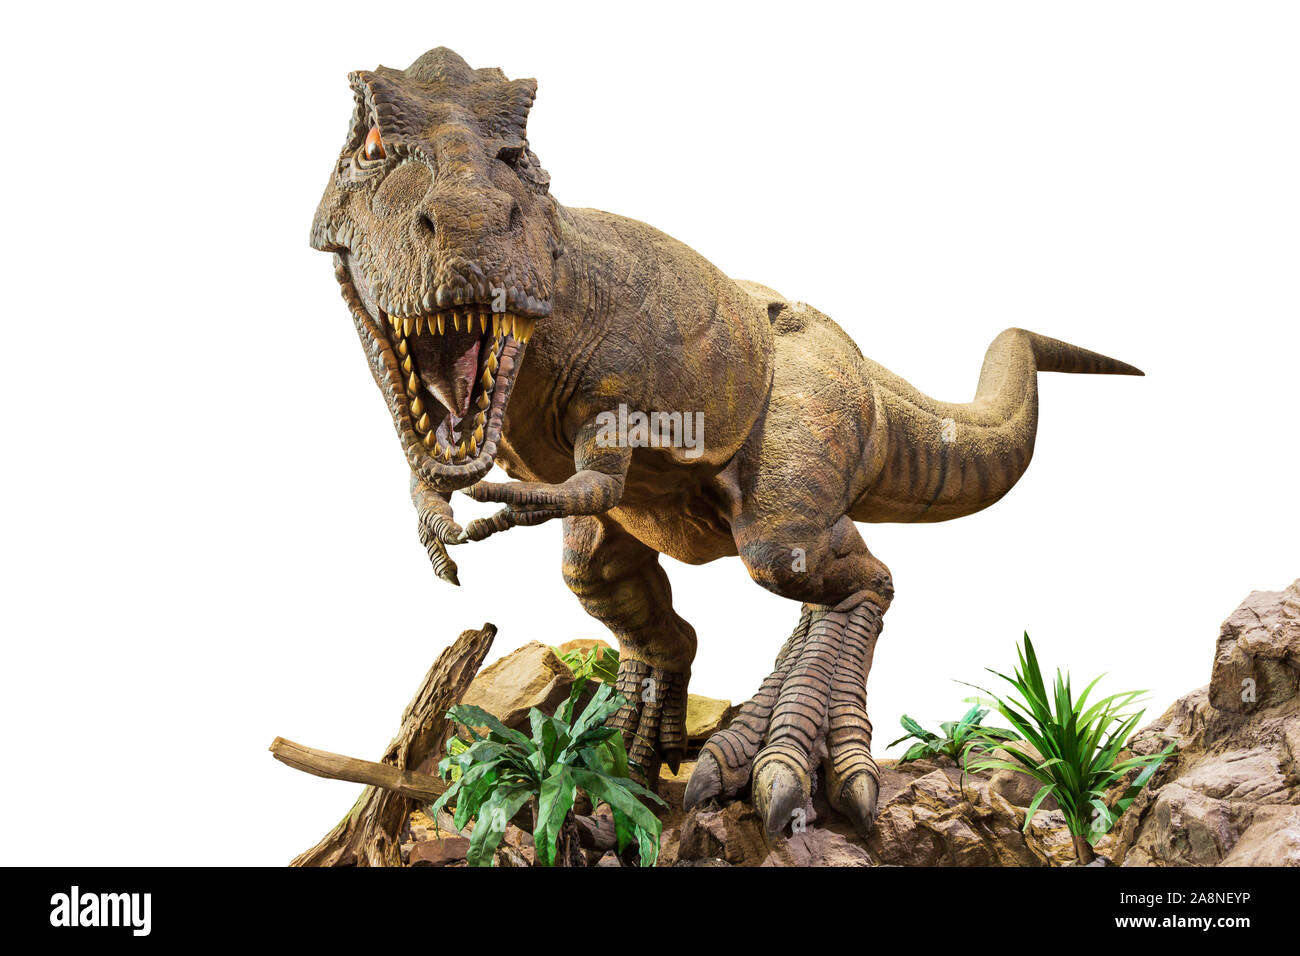 Tyrannosaurus rex . T-rex is walking , growling and open mouth on rock . White isolated background . Embedded clipping paths . Stock Photo